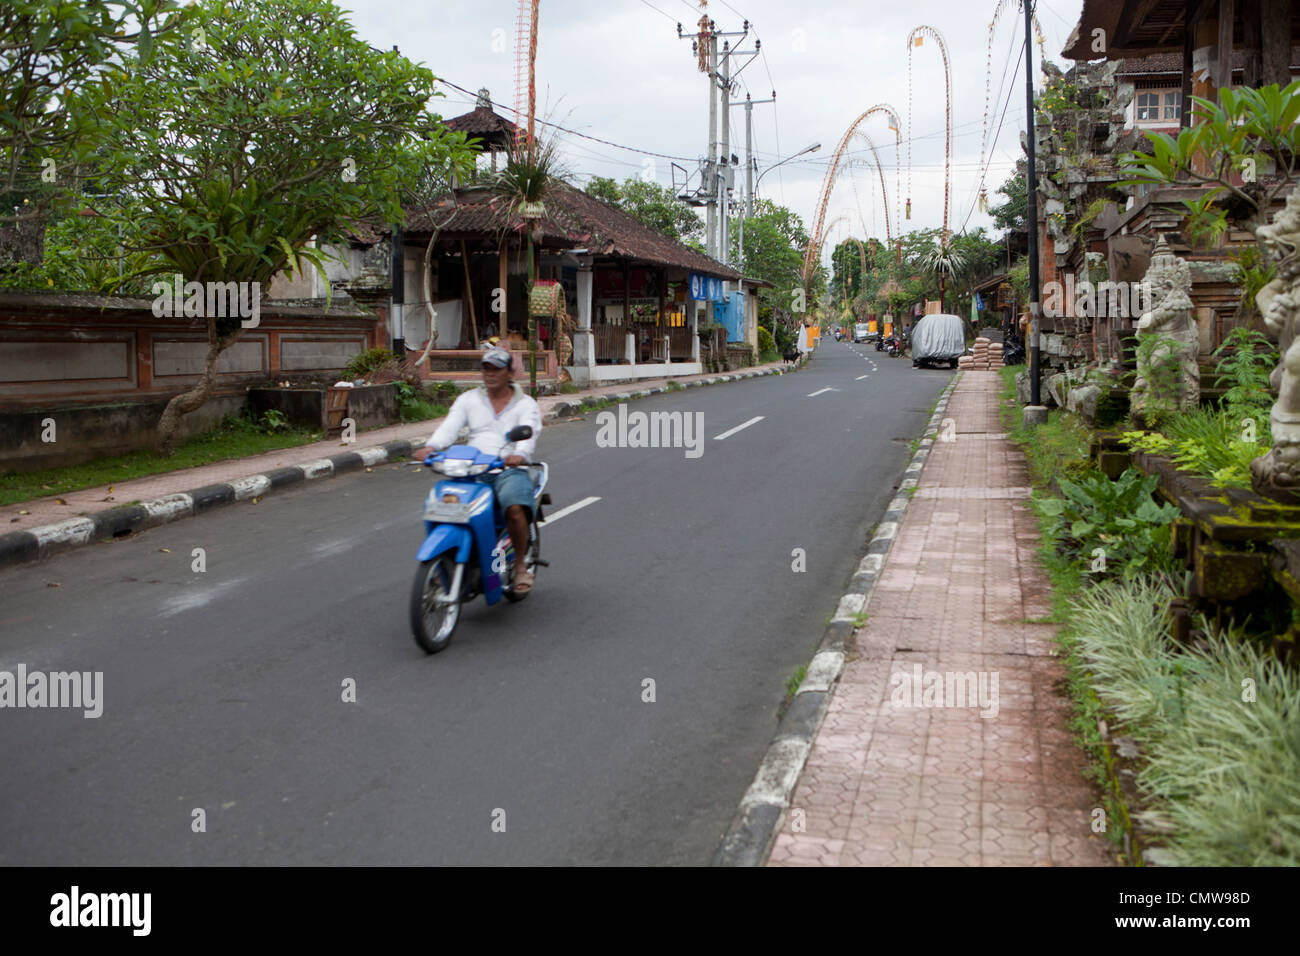 Main road in the Balinese town of Ubud, Bali, Indonesia Stock Photo